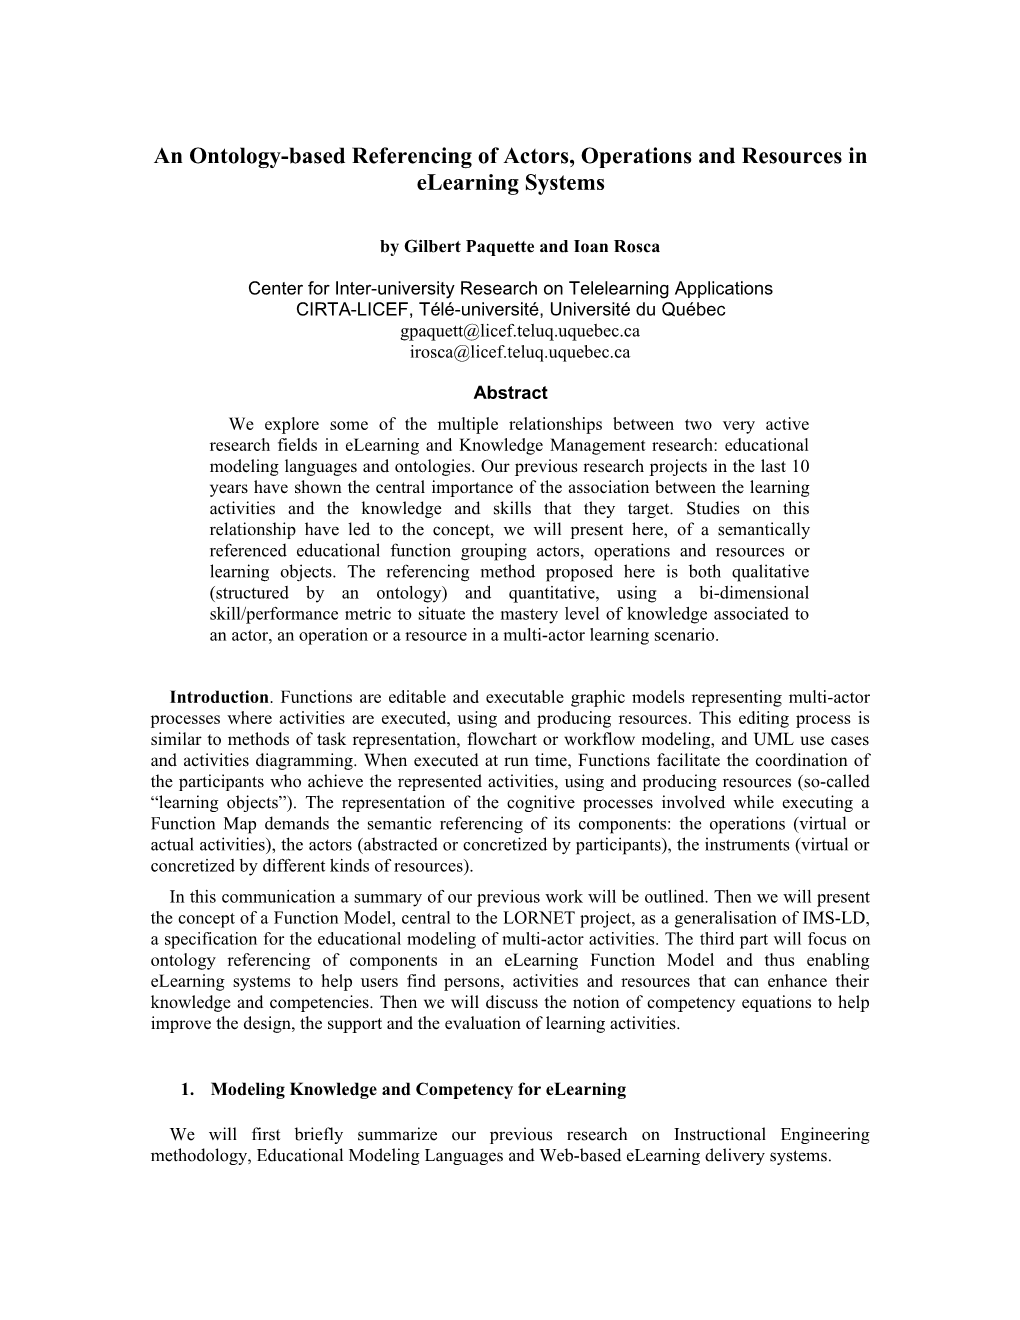 Ontology-Based Indexing of Actors, Operations and Resources in an On-Line Learning System